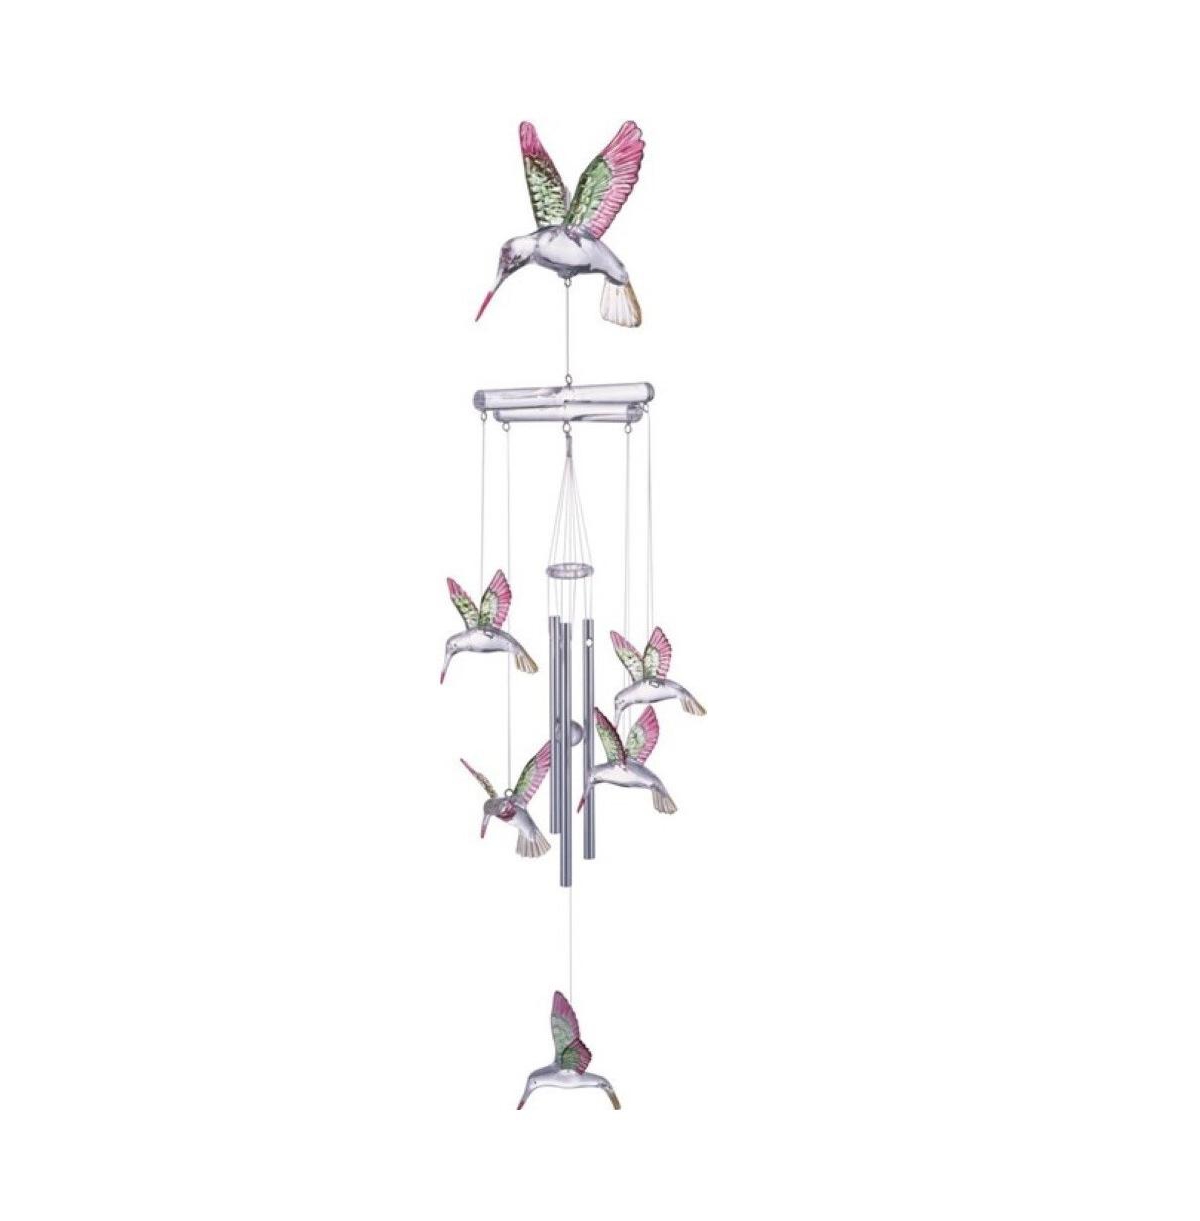 19" Long Hummingbird Acrylic Wind Chime Home Decor Perfect Gift for House Warming, Holidays and Birthdays - Blue